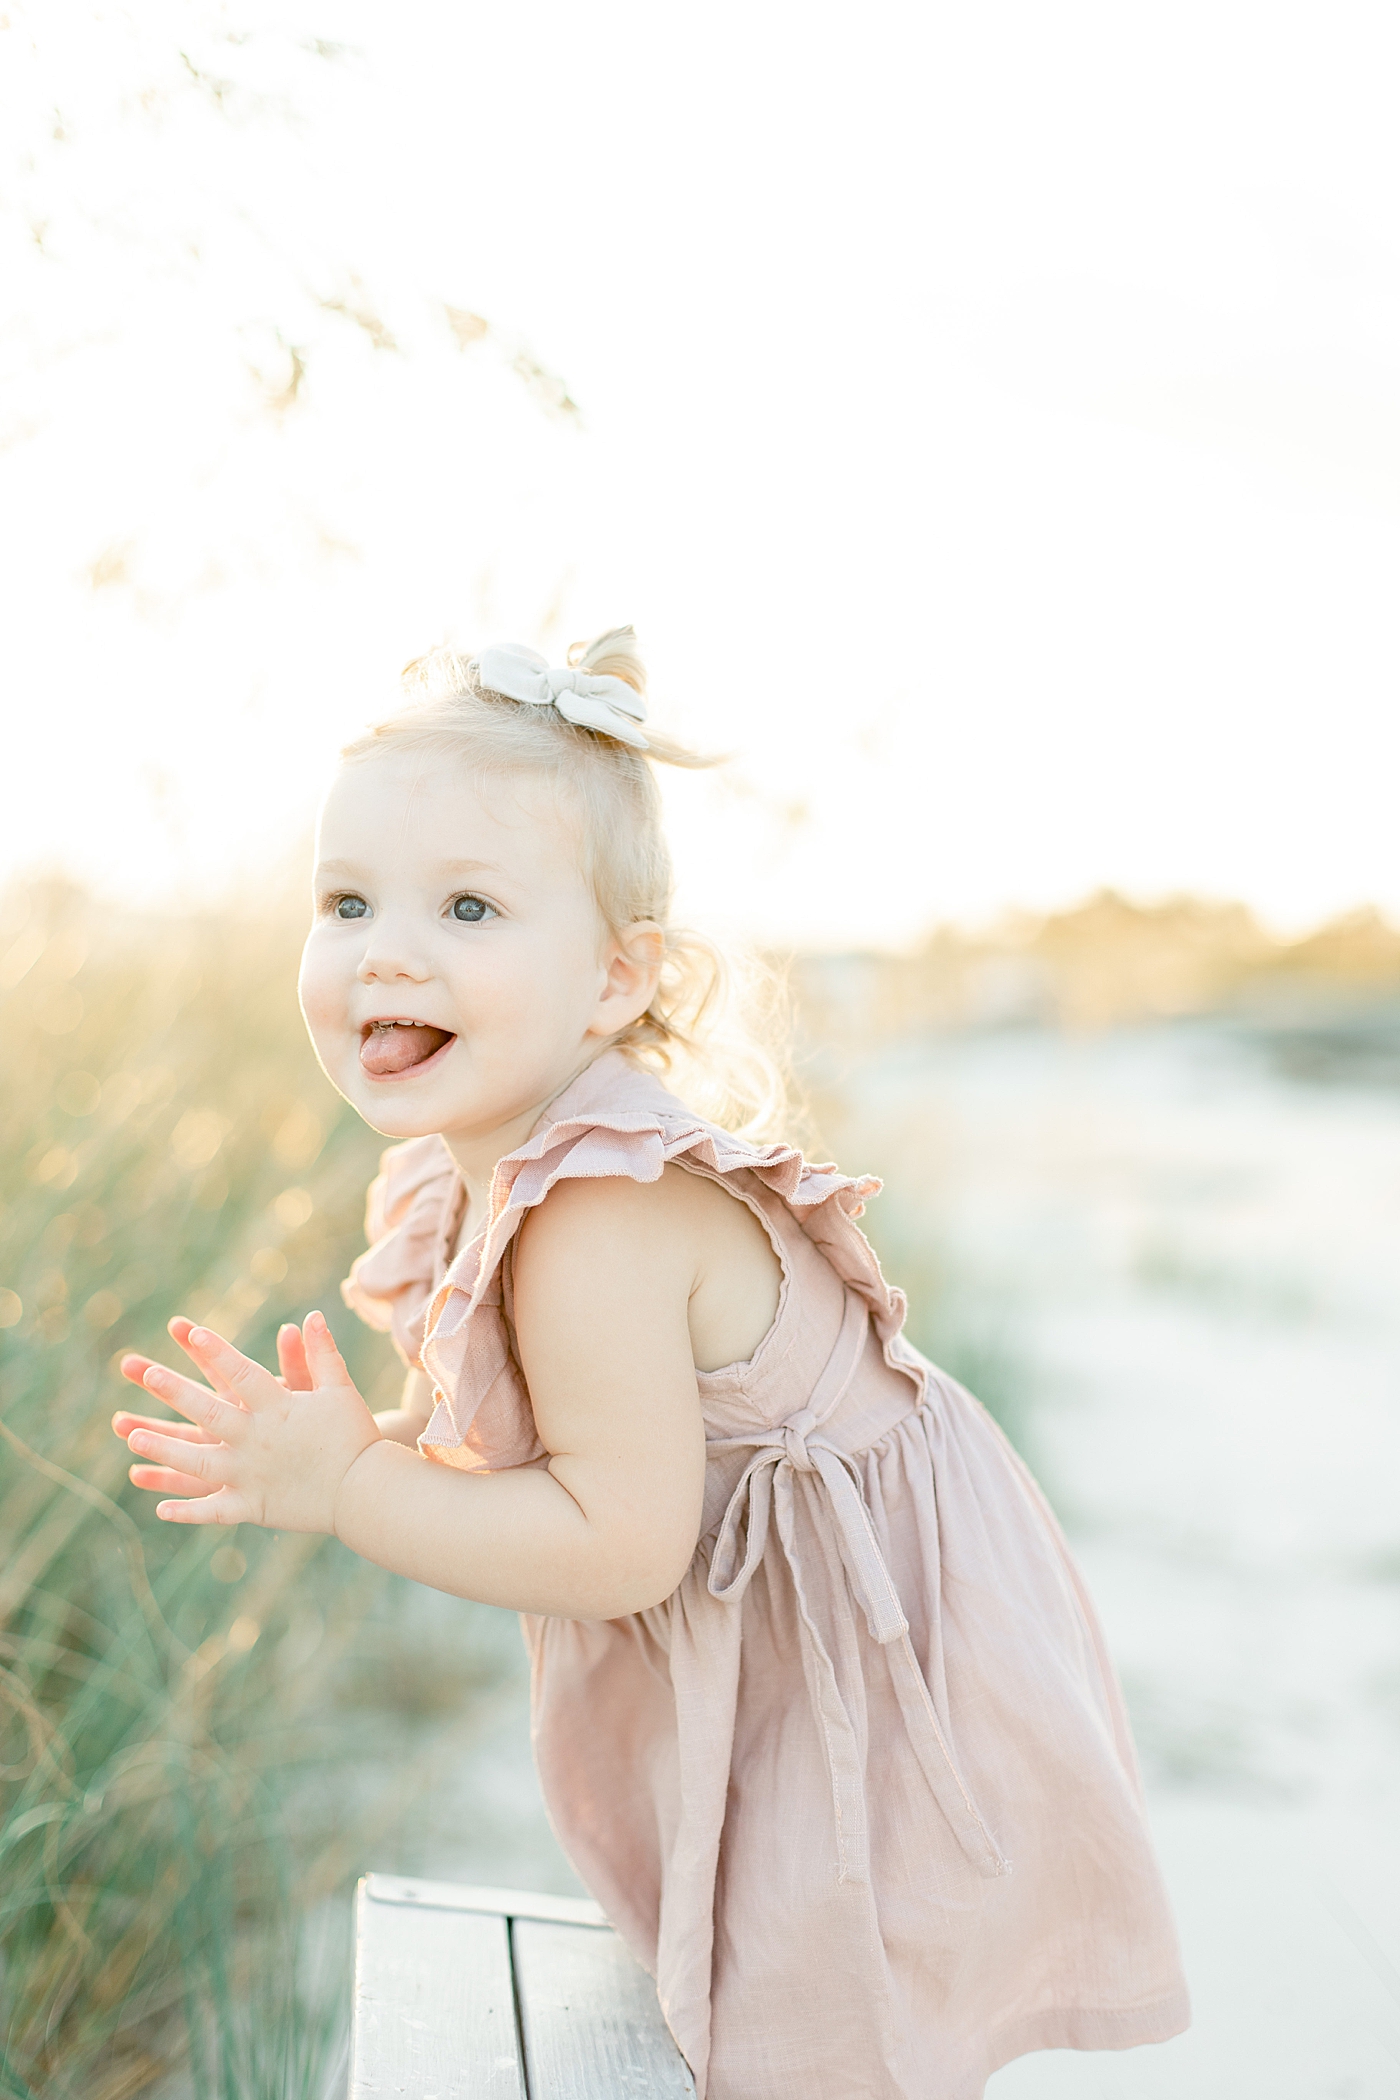 Toddler girl in pink dress clapping her hands | Photo by Little Sunshine Photography